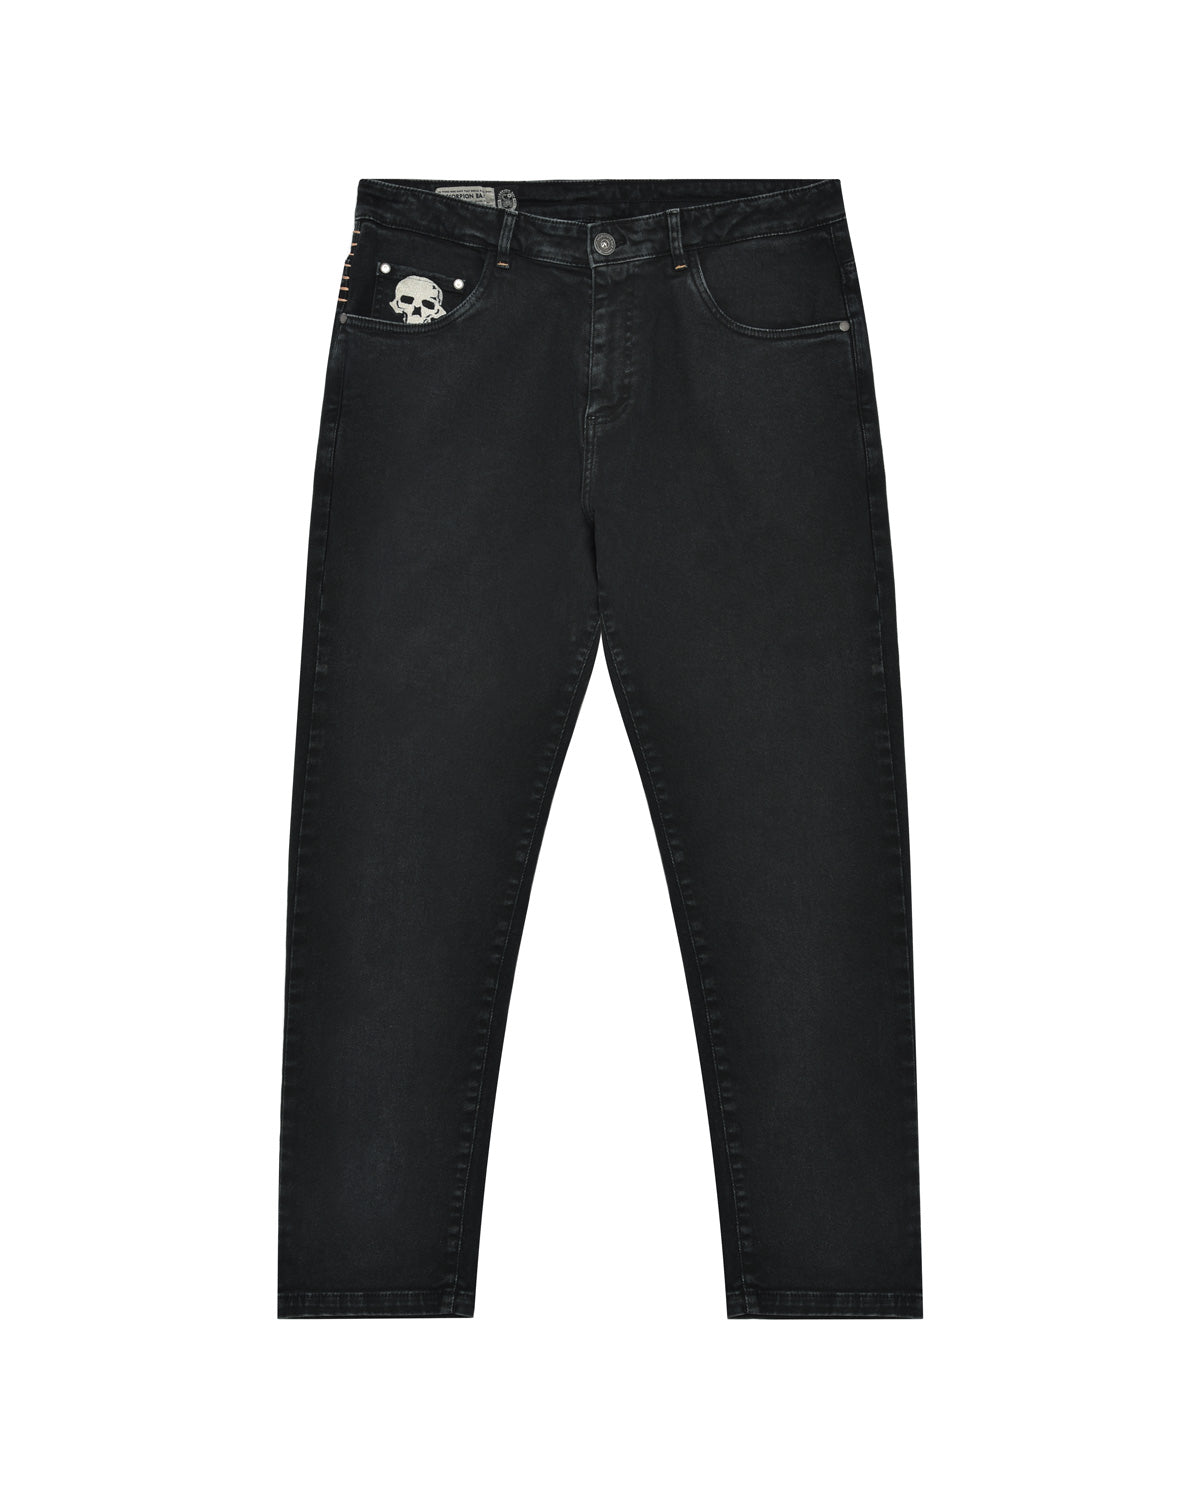 Man | 5 Pocket Trousers In Black Cotton Twill